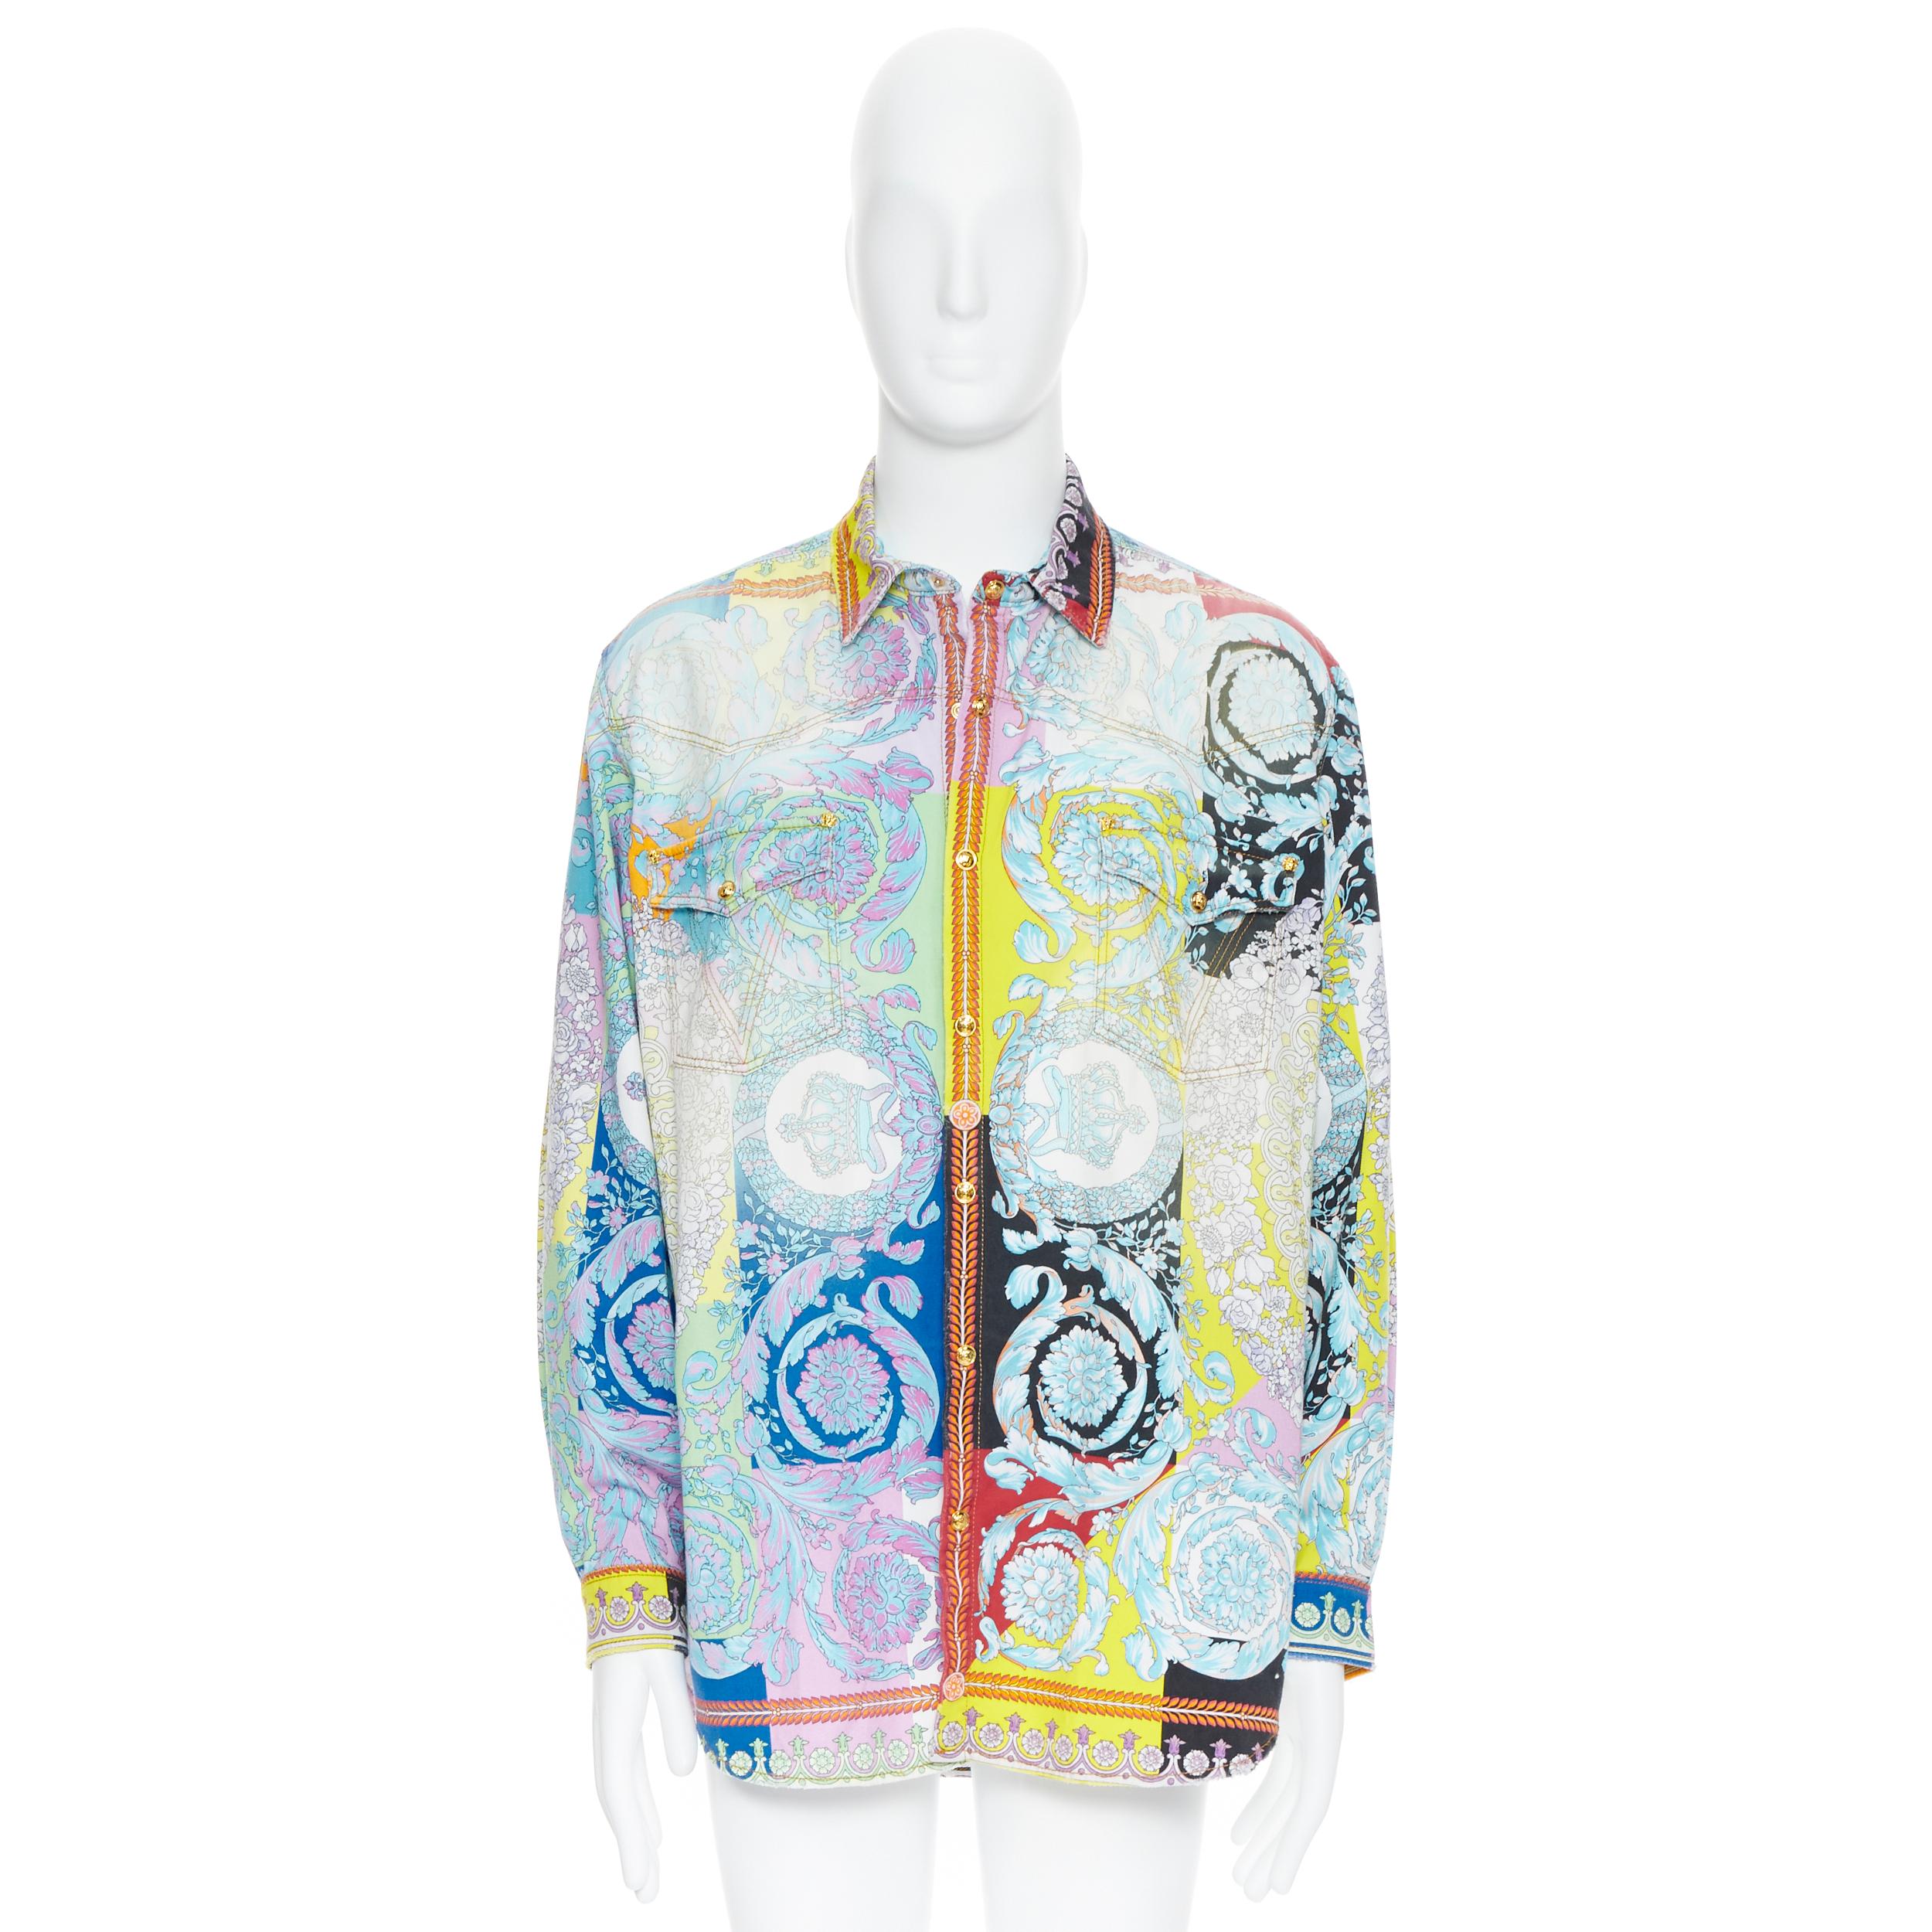 new VERSACE 2019 Techno Baroque distressed cotton Medusa oversized shirt EU38 S
Reference: TGAS/A05495
Brand: Versace
Designer: Donatella Versace
Collection: Spring Summer 2019 Runway
Material: Cotton
Color: Blue
Pattern: Floral
Closure: